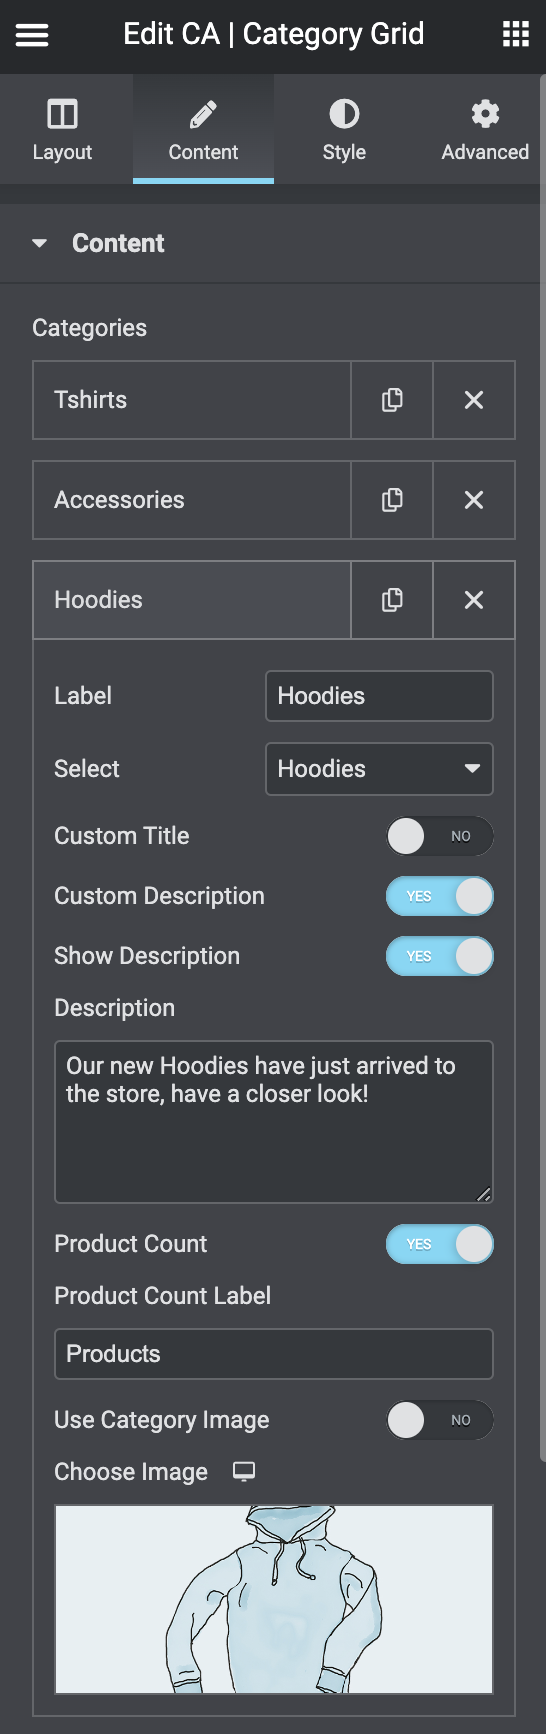 Category grid settings, edit category